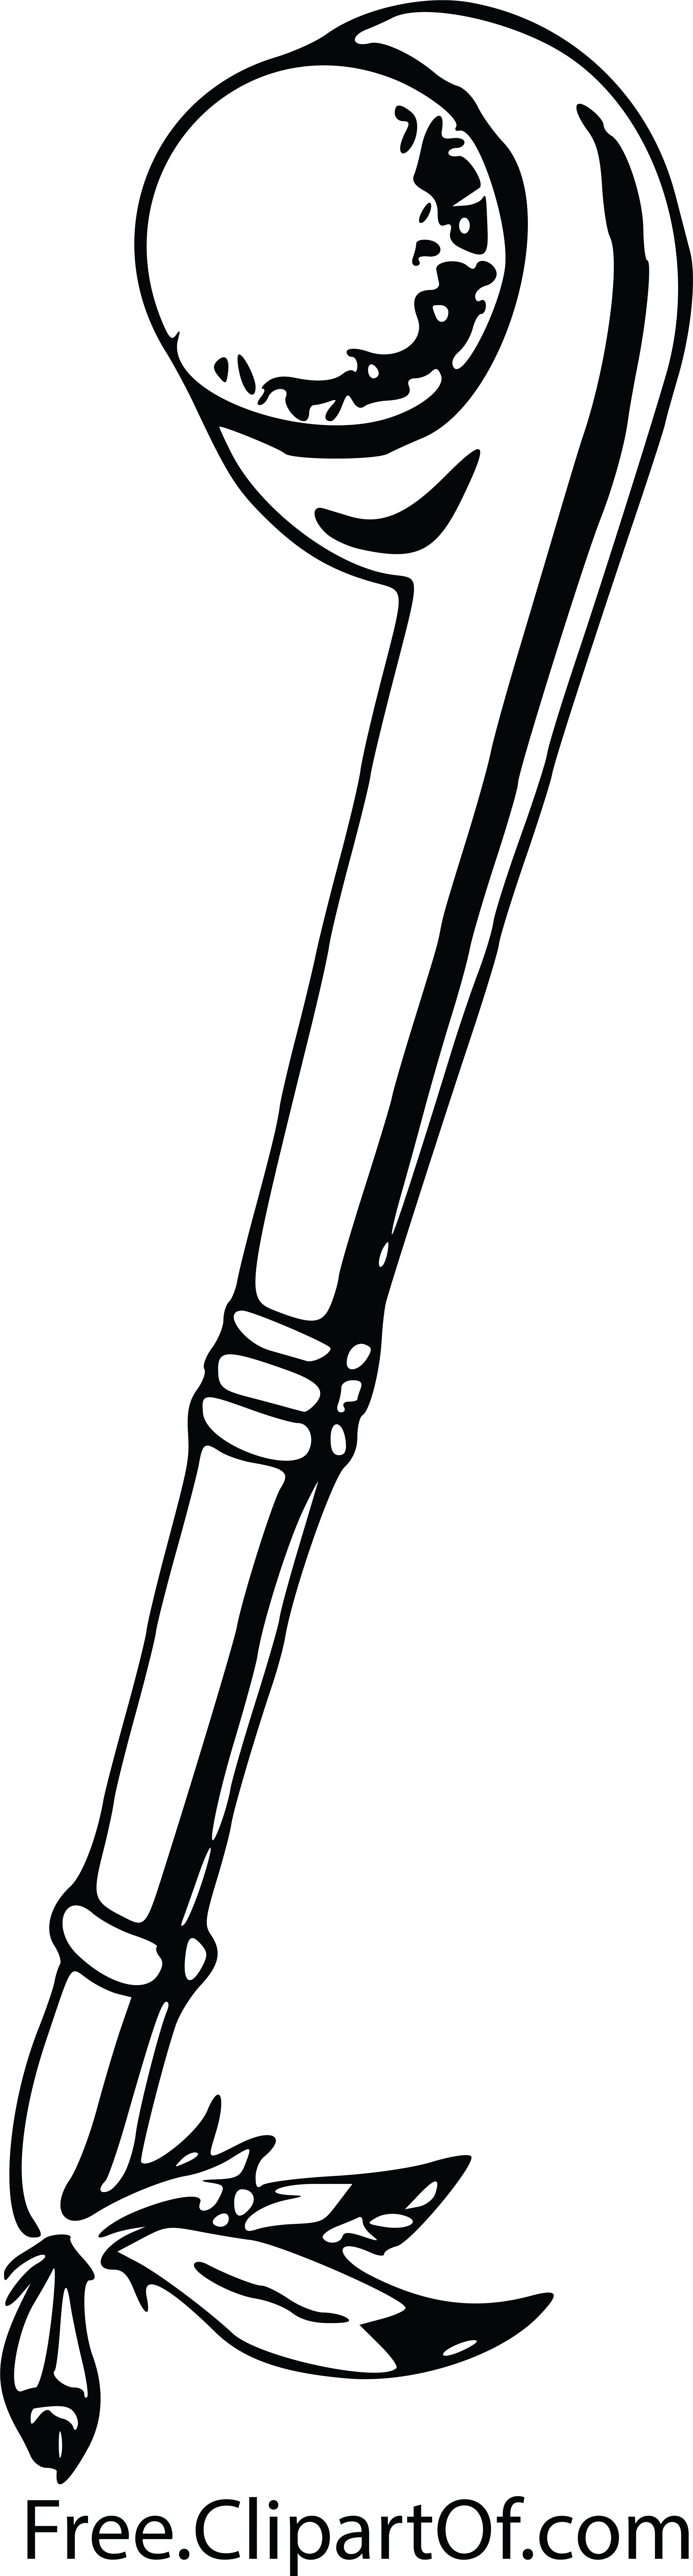 Free Clipart Of A Black And White Tomahawk With Feathers - Free Clipart Of A Black And White Tomahawk With Feathers (4000x14854)